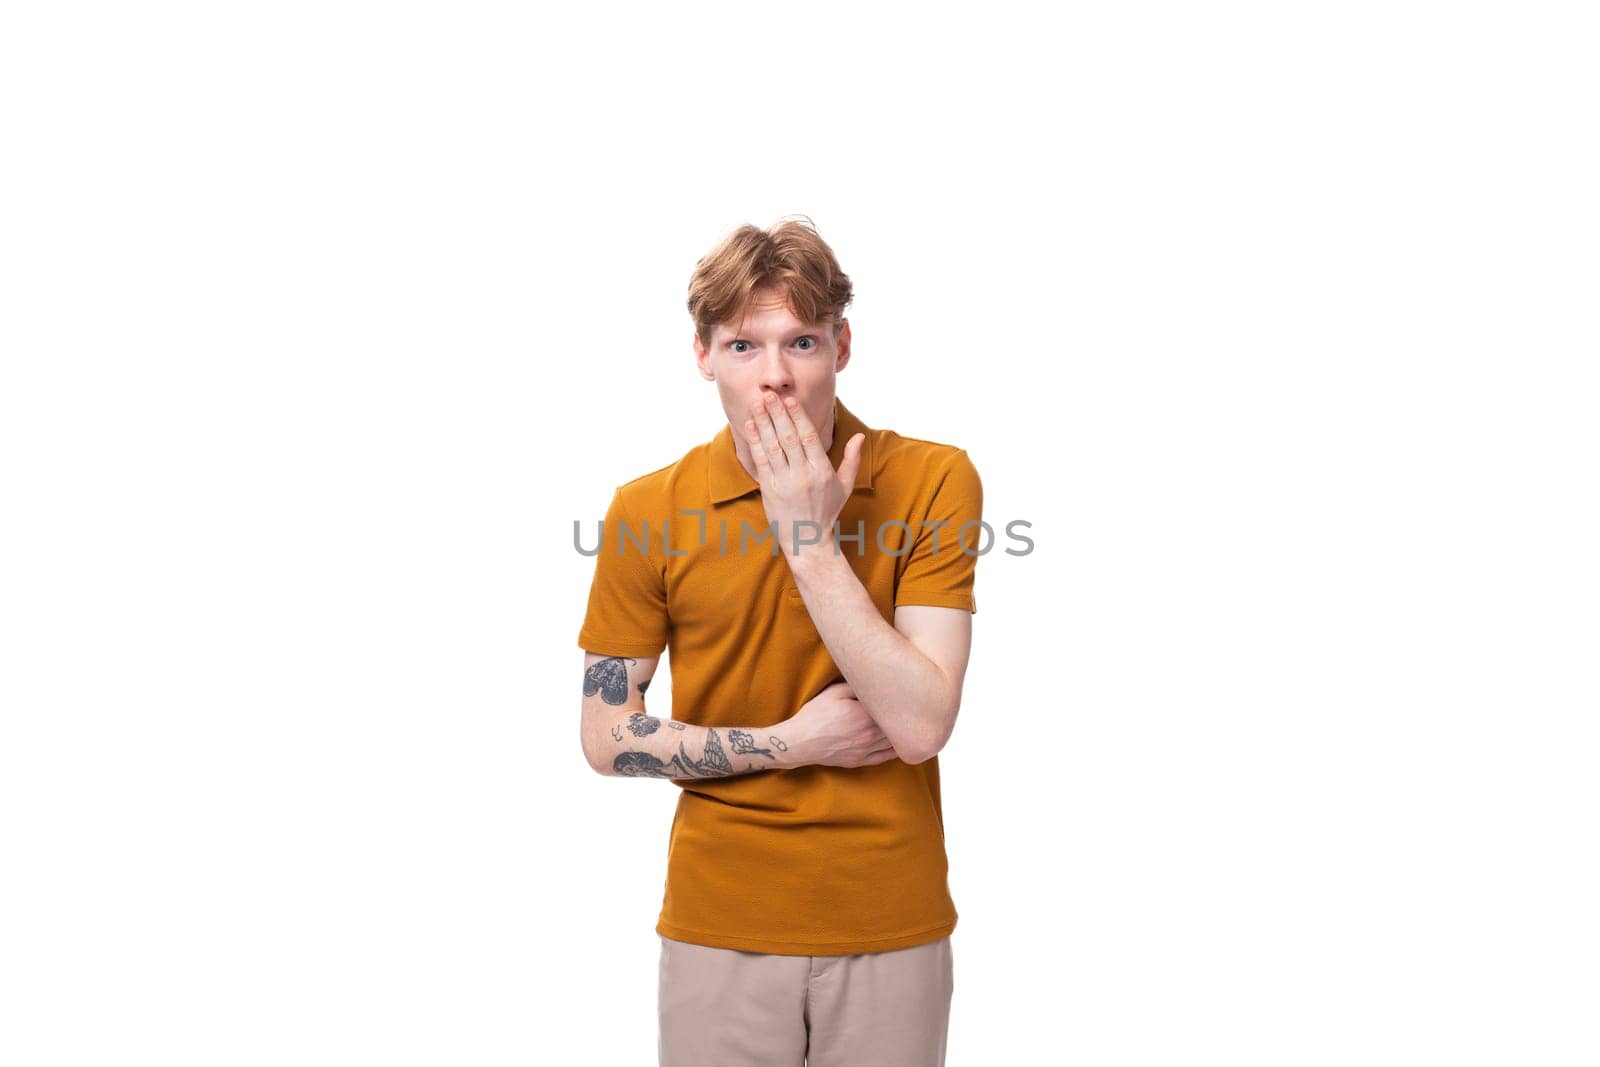 young smart guy with red hair stands thoughtfully on a white background with copy space by TRMK